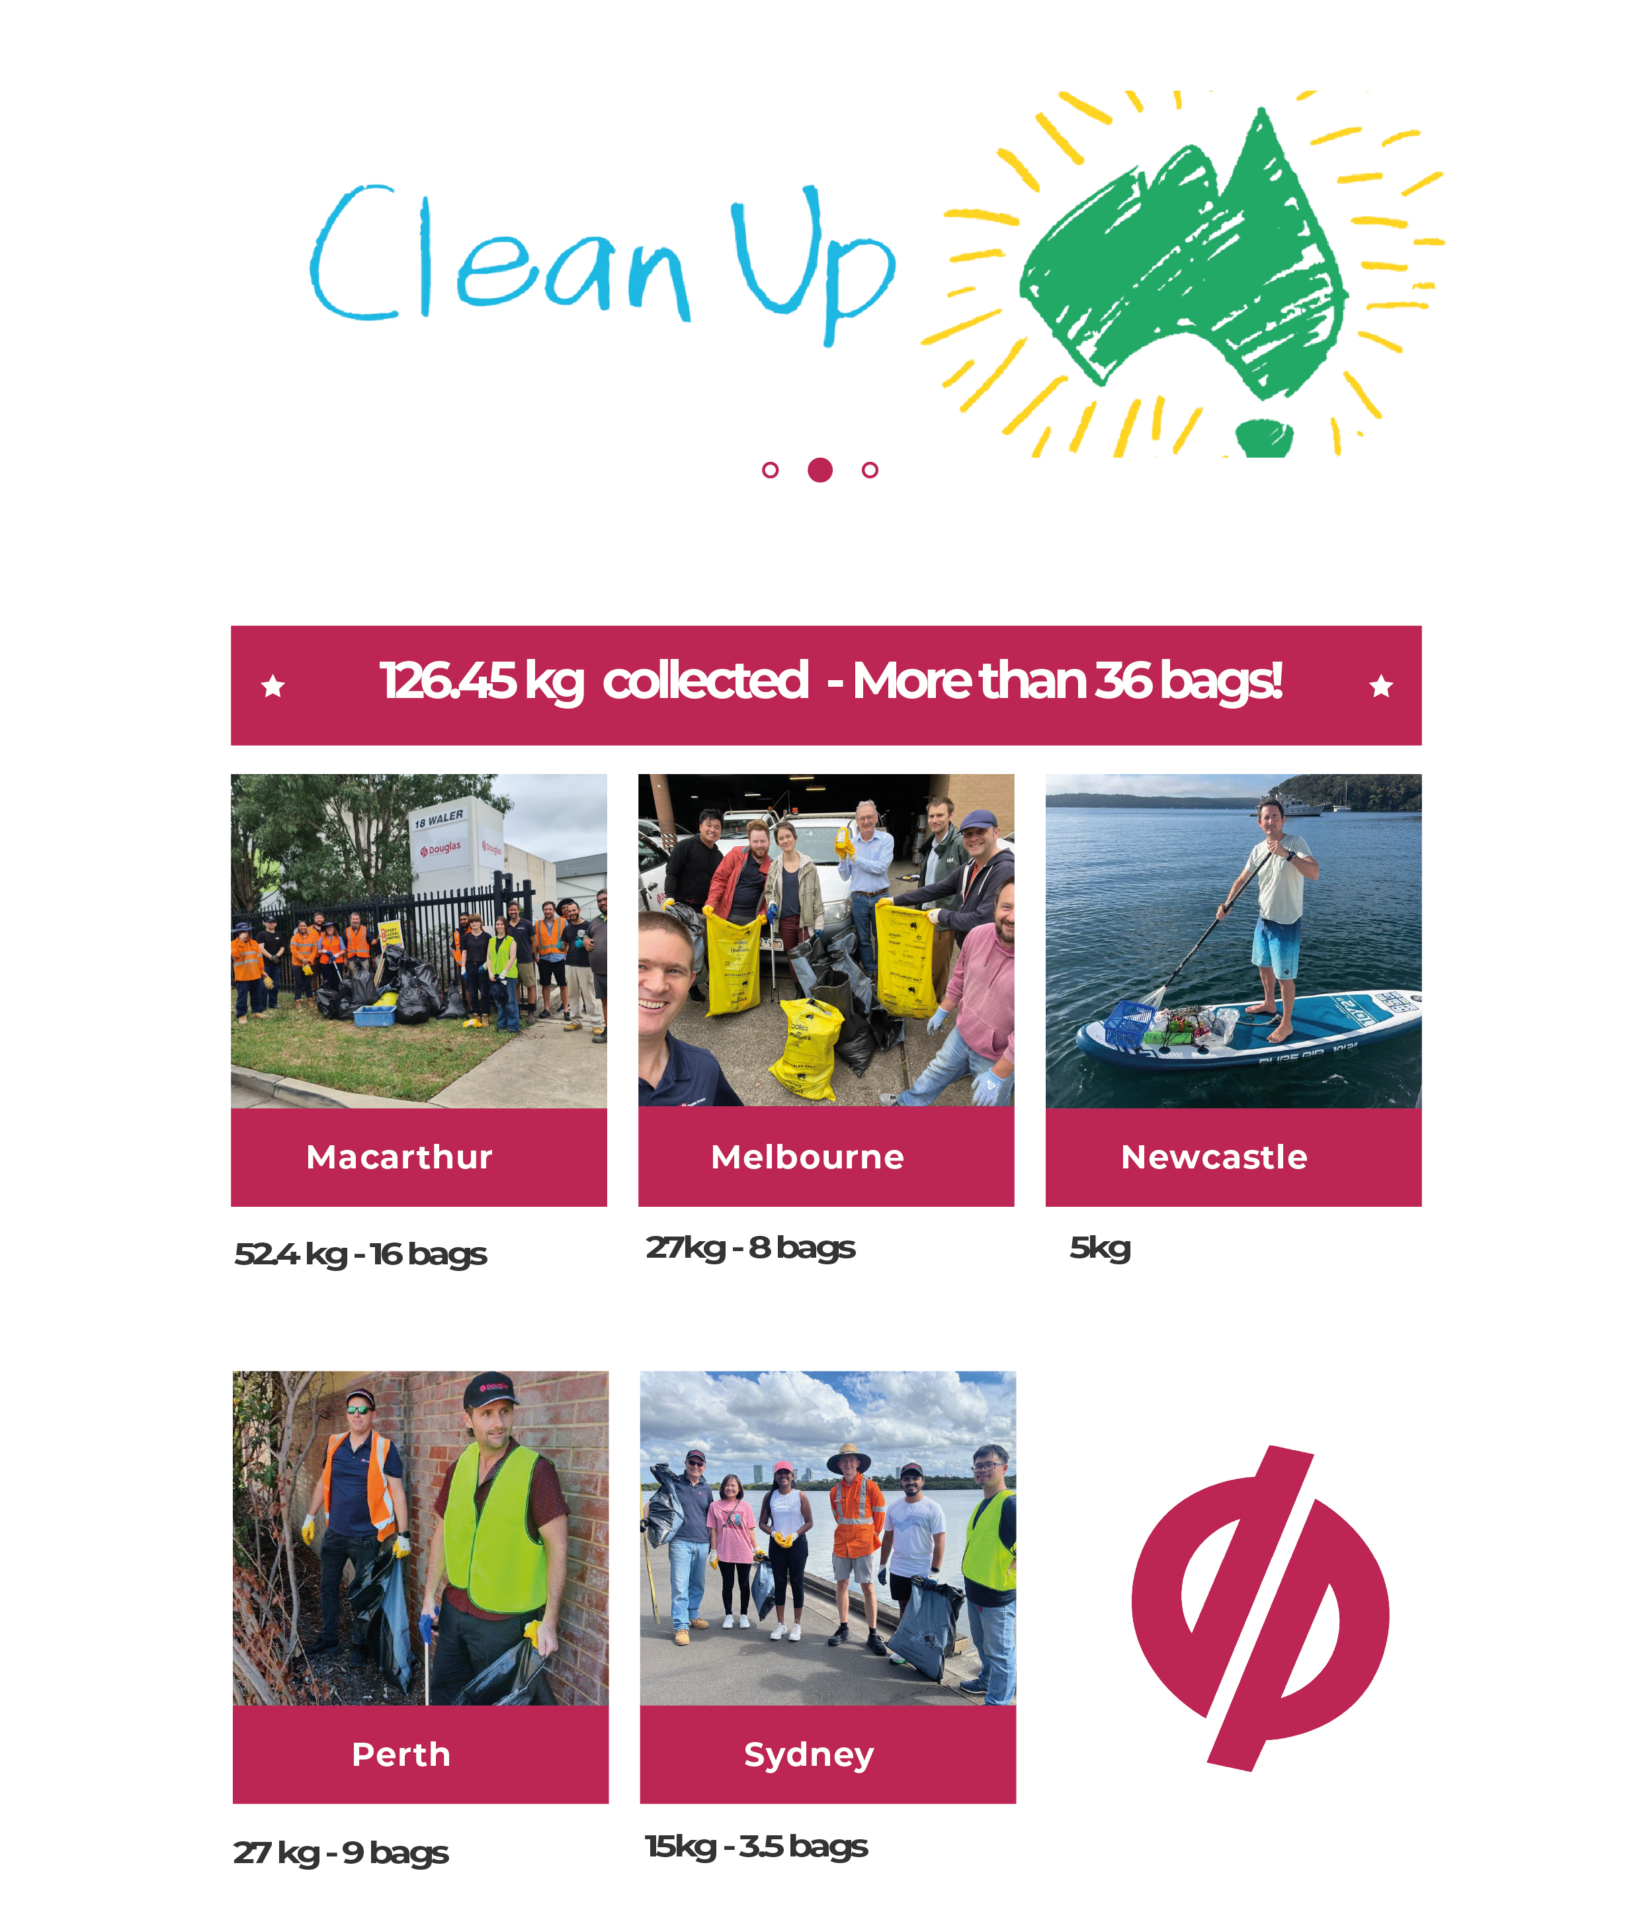 Douglas Partners for Clean Up Australia Day